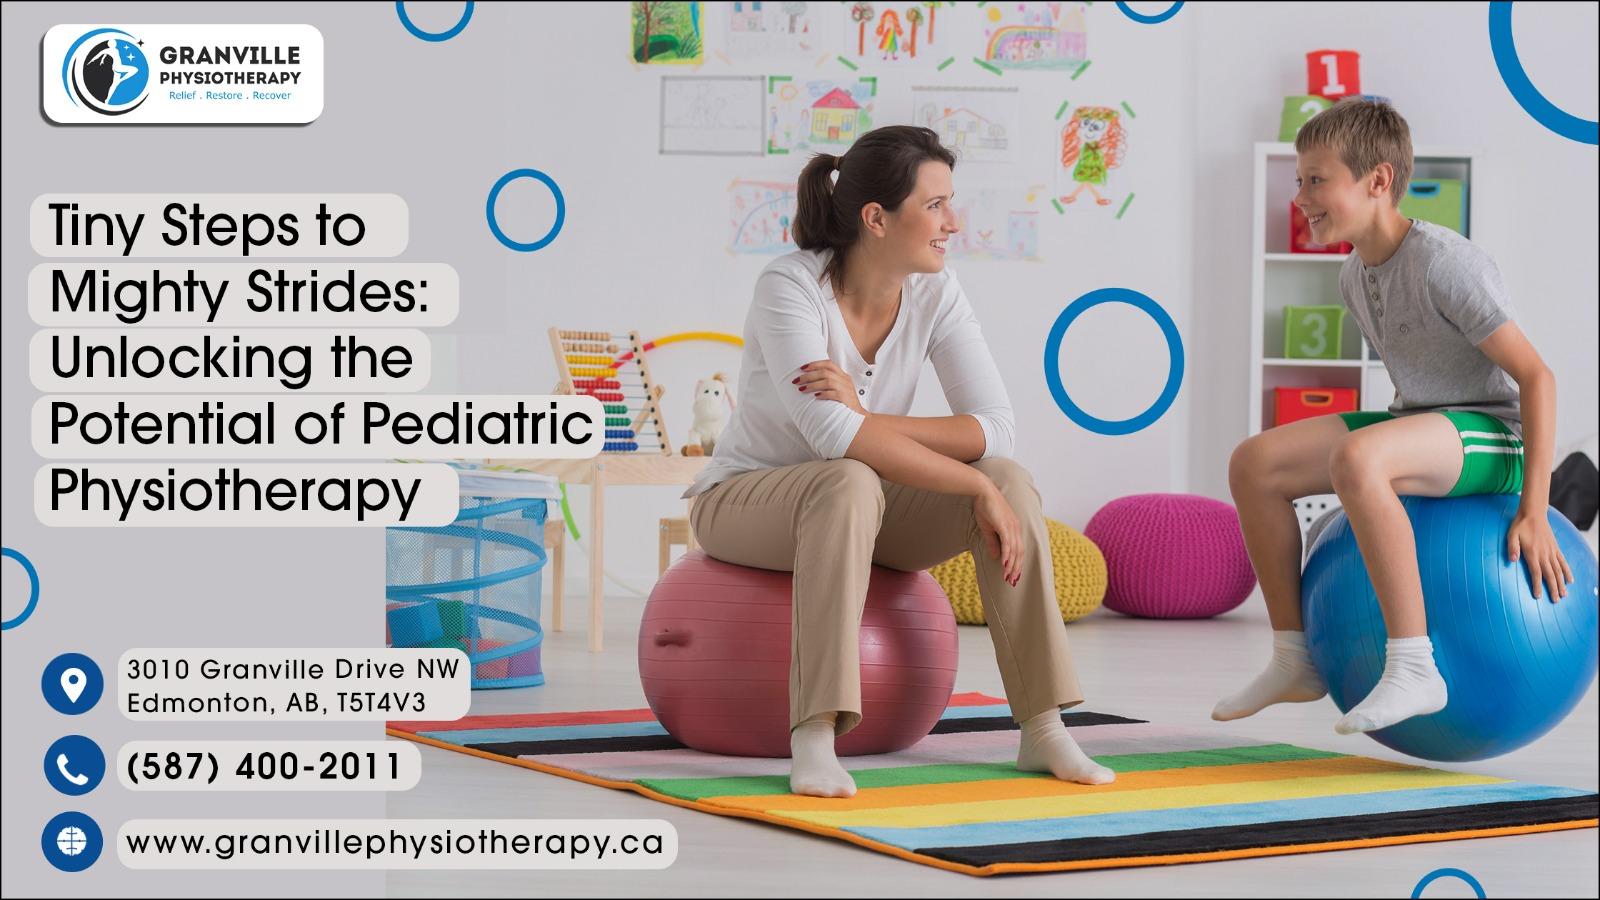 Tiny Steps to Mighty Strides Unlocking the Potential of Pediatric Physiotherapy